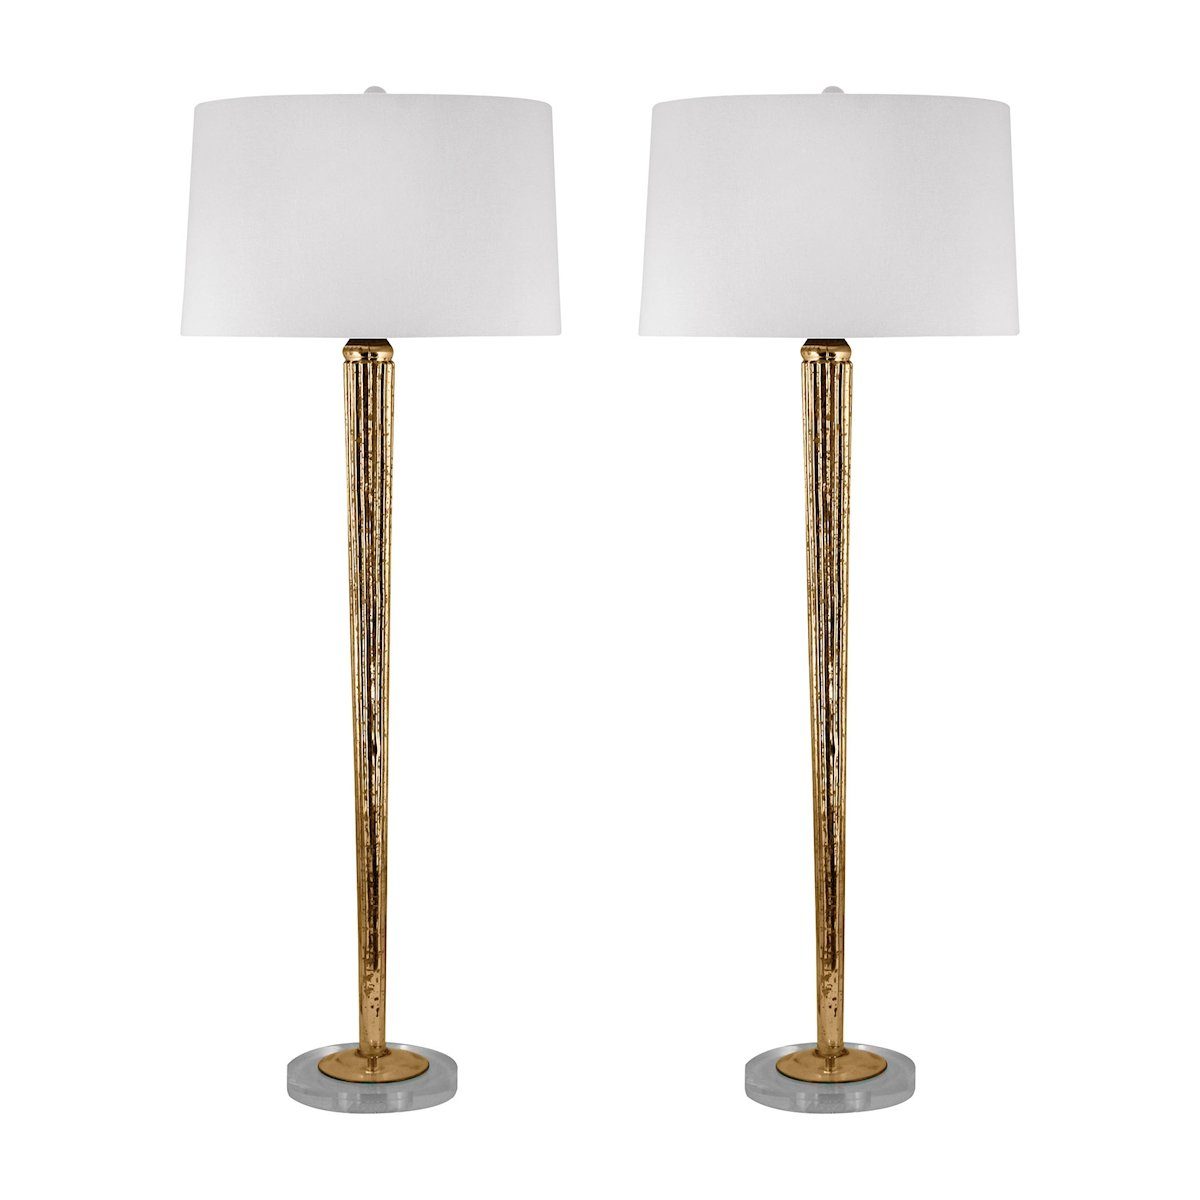 Mercury Glass Candlestick Lamp In Gold Lamps Dimond Lighting 